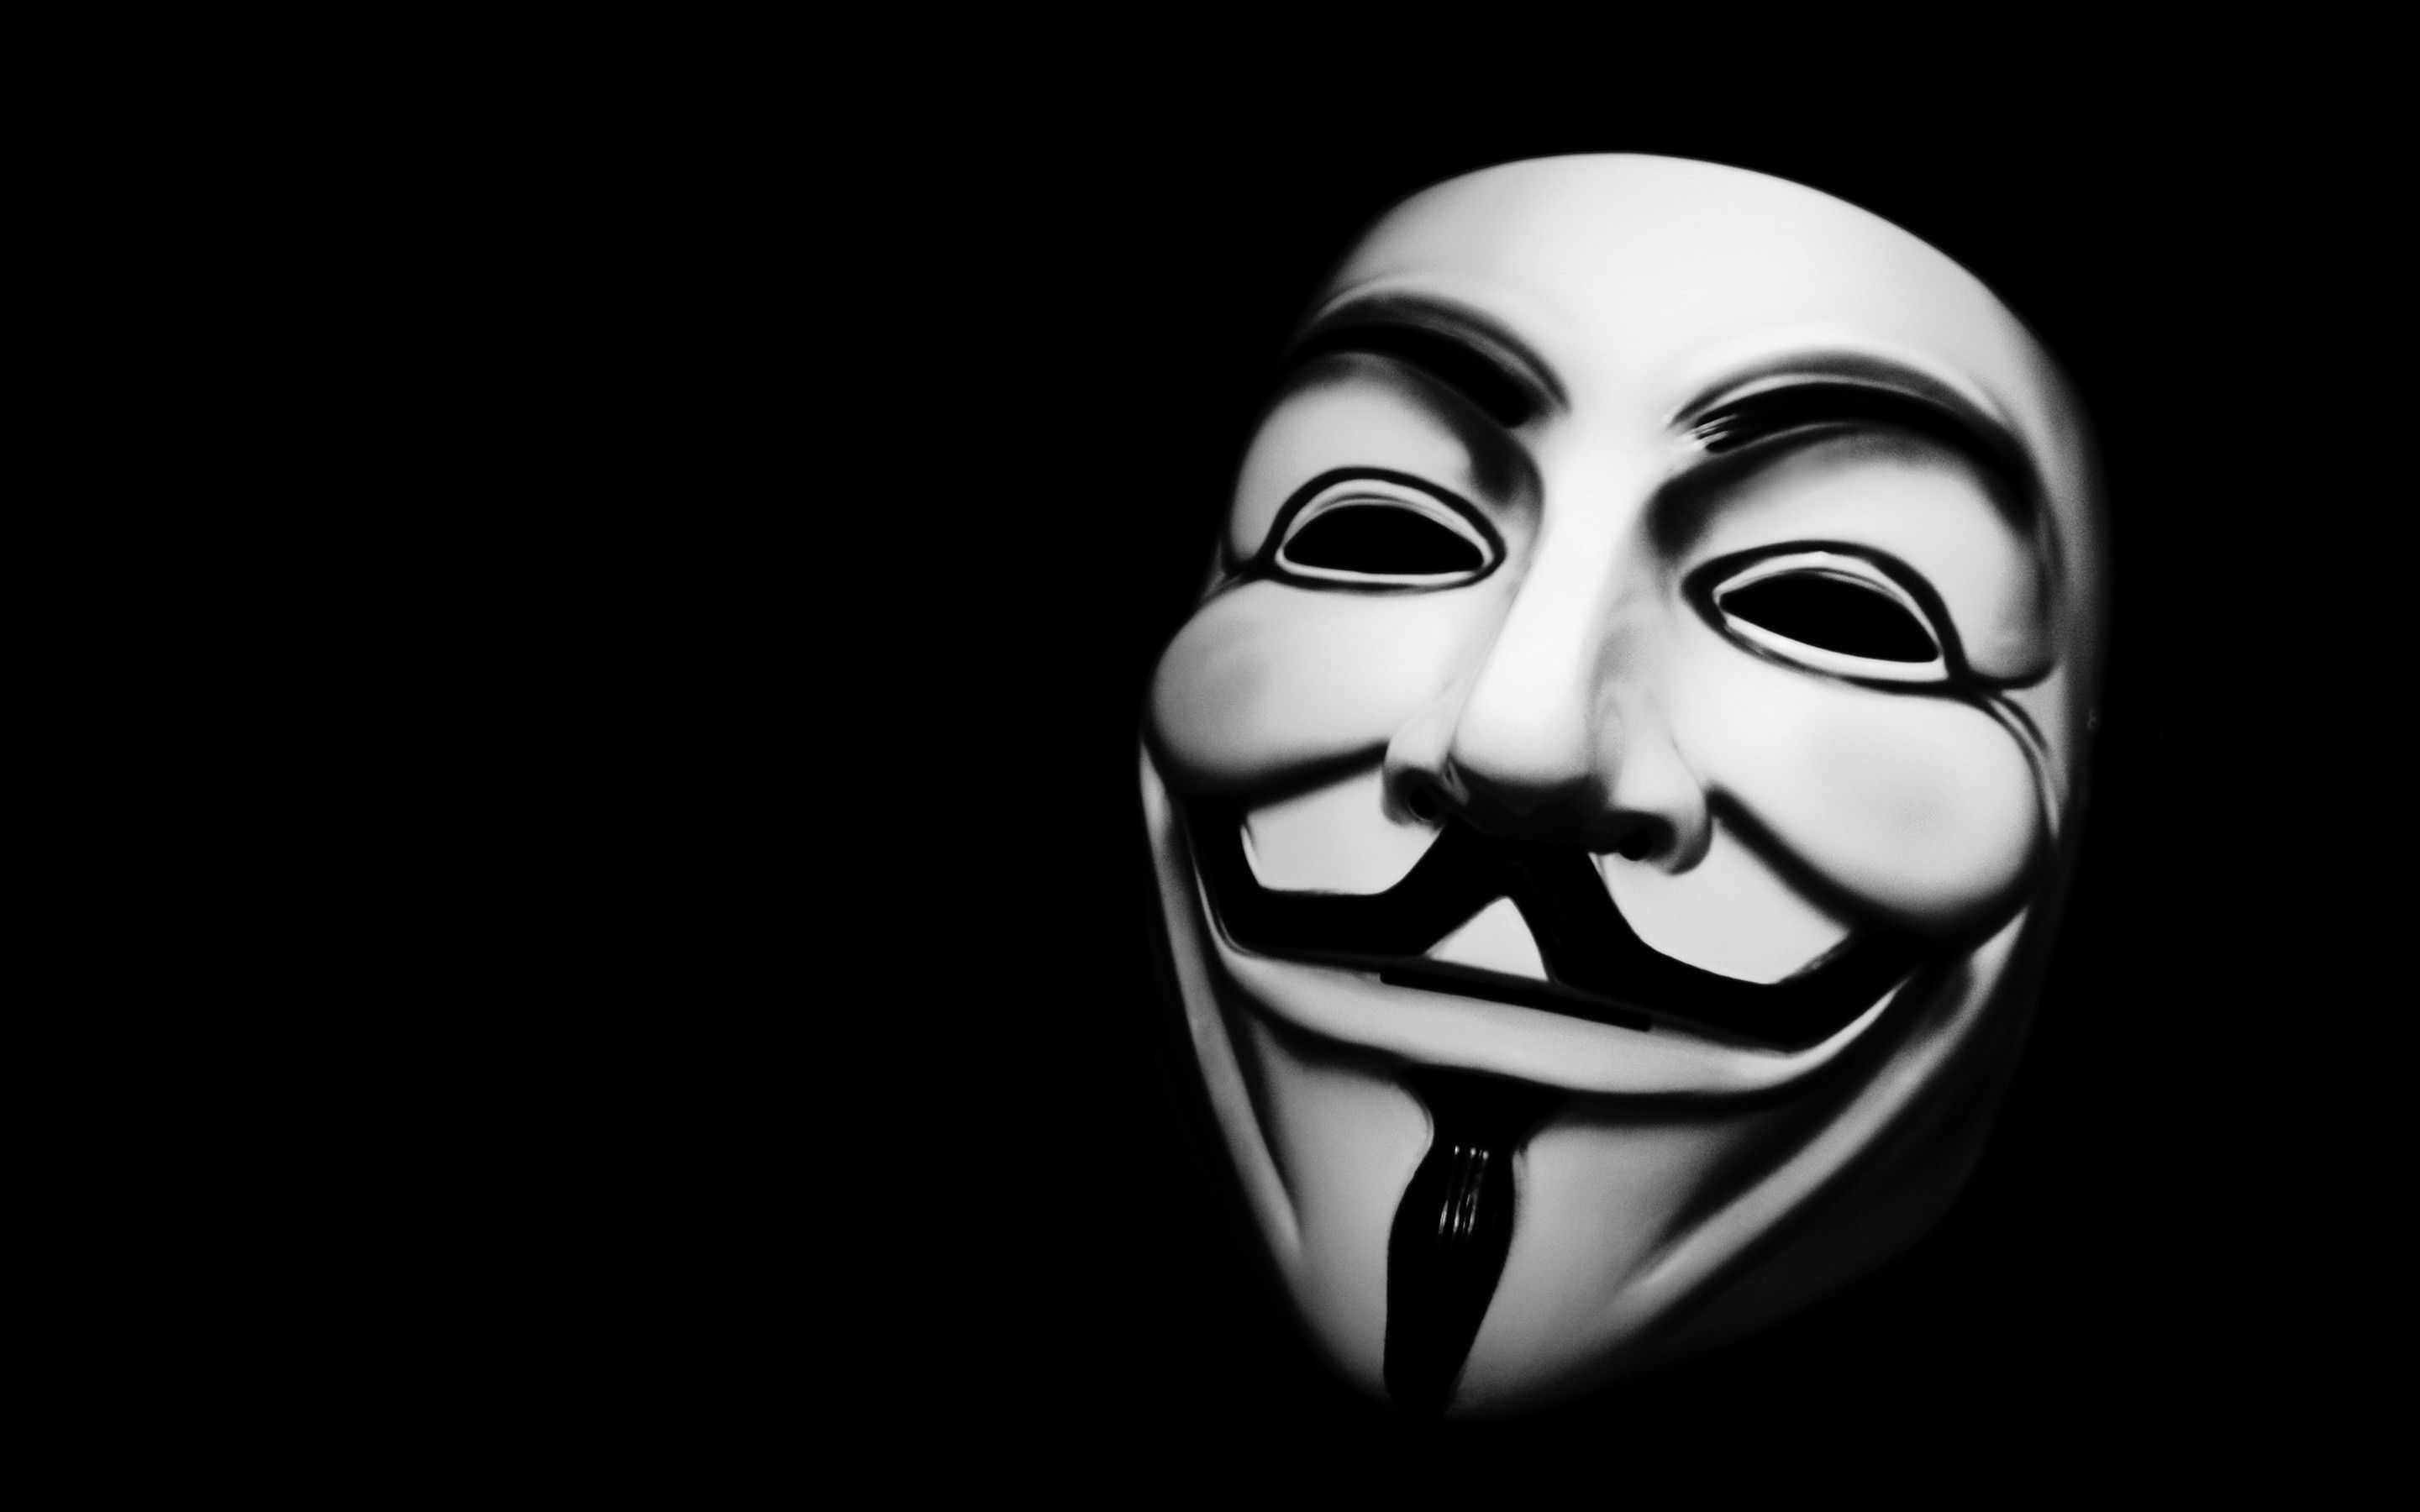 HD Anonymous Mask Wallpaper Picture Cool 1080p Windows Wallpaper Download Desktop Background Colourful Ultra HD 4k 2880x1800